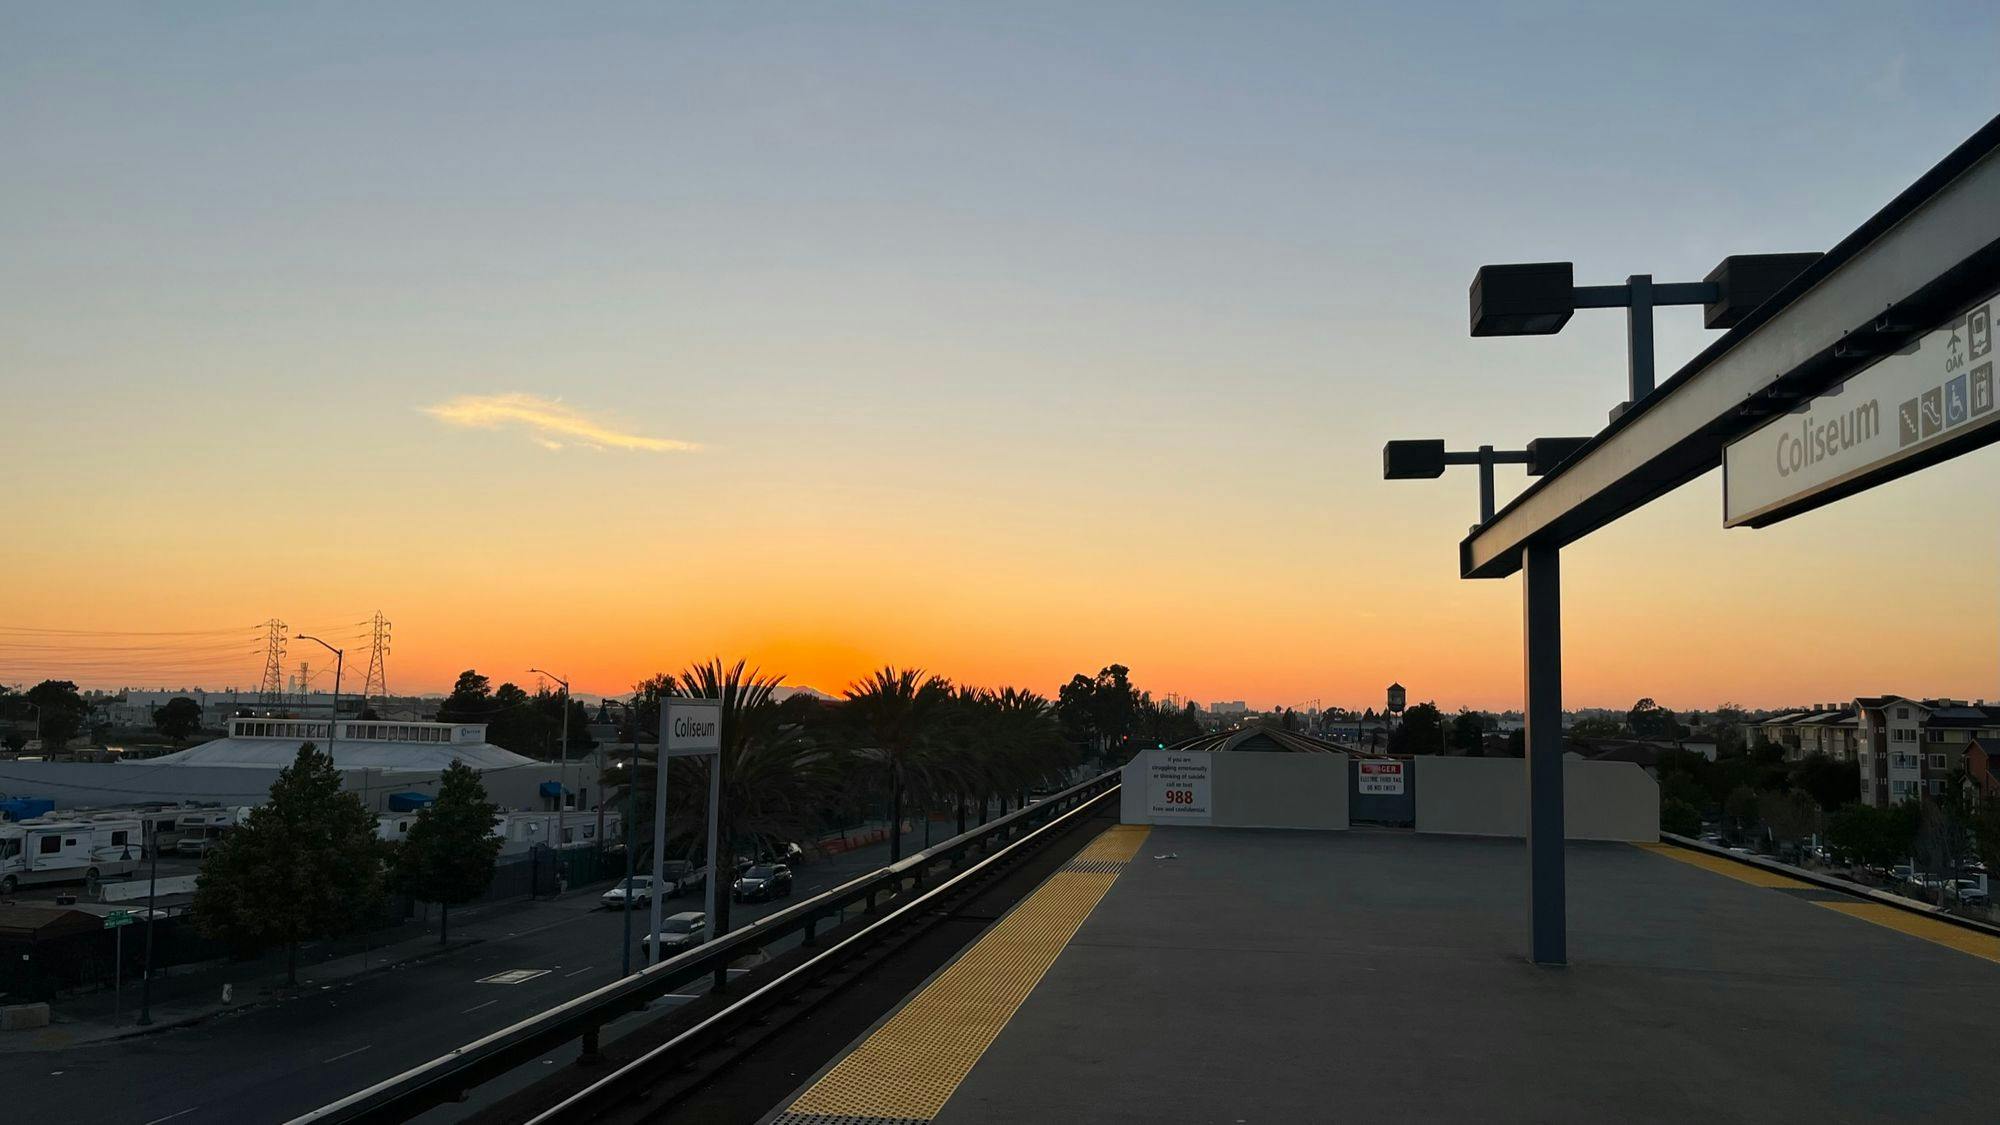 Coliseum Train Station during the Sunset